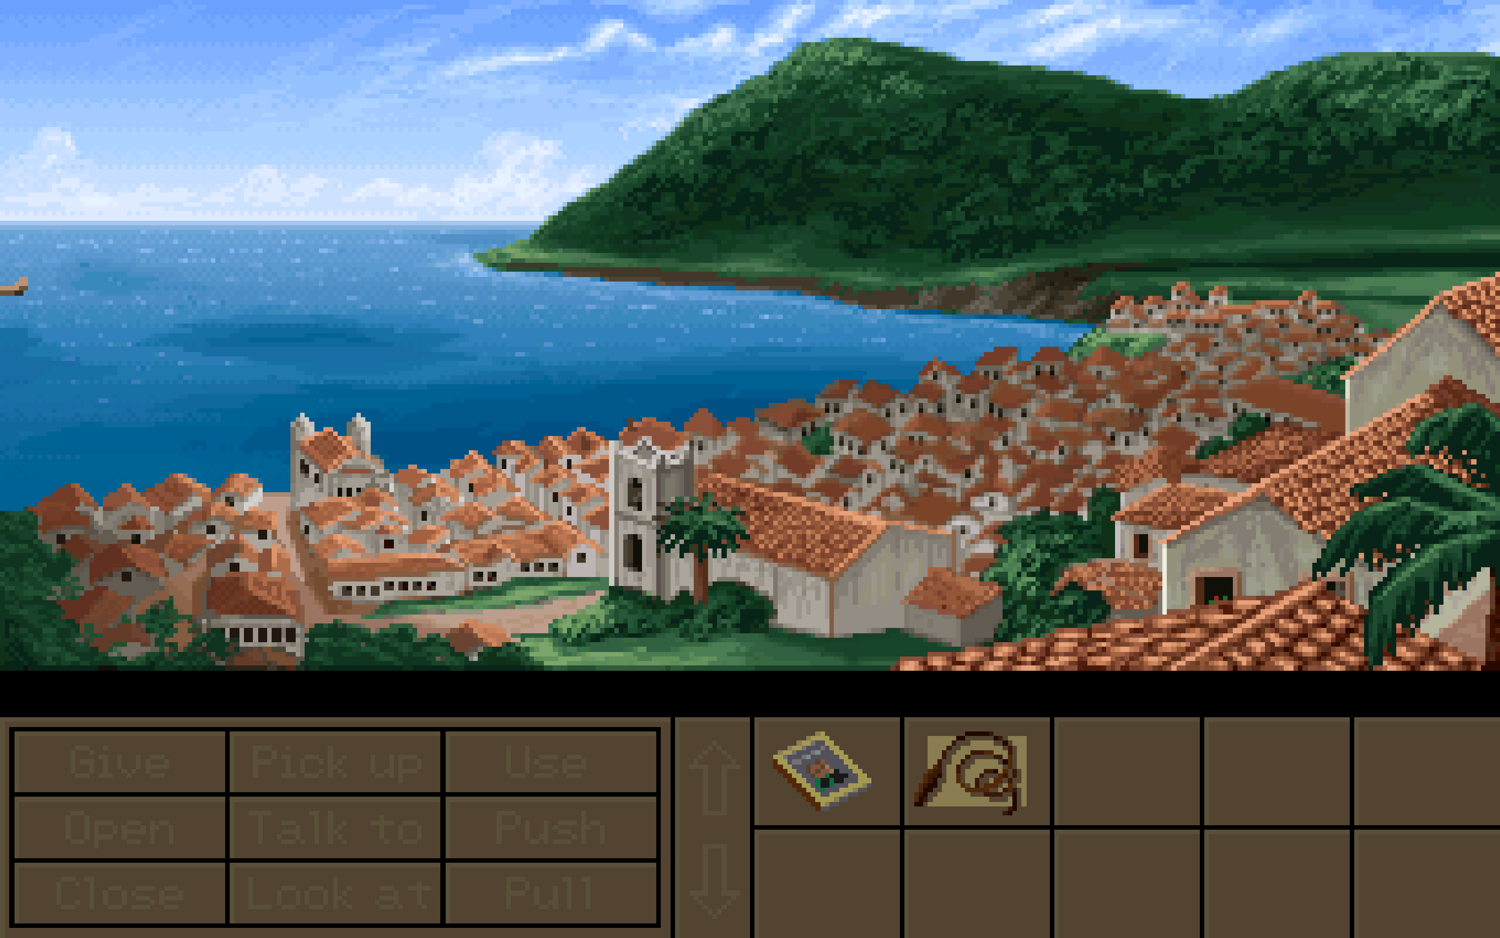 Screenshot from Indiana Jones and the Fate of Atlantis. An establishing shot of a town in Azores.